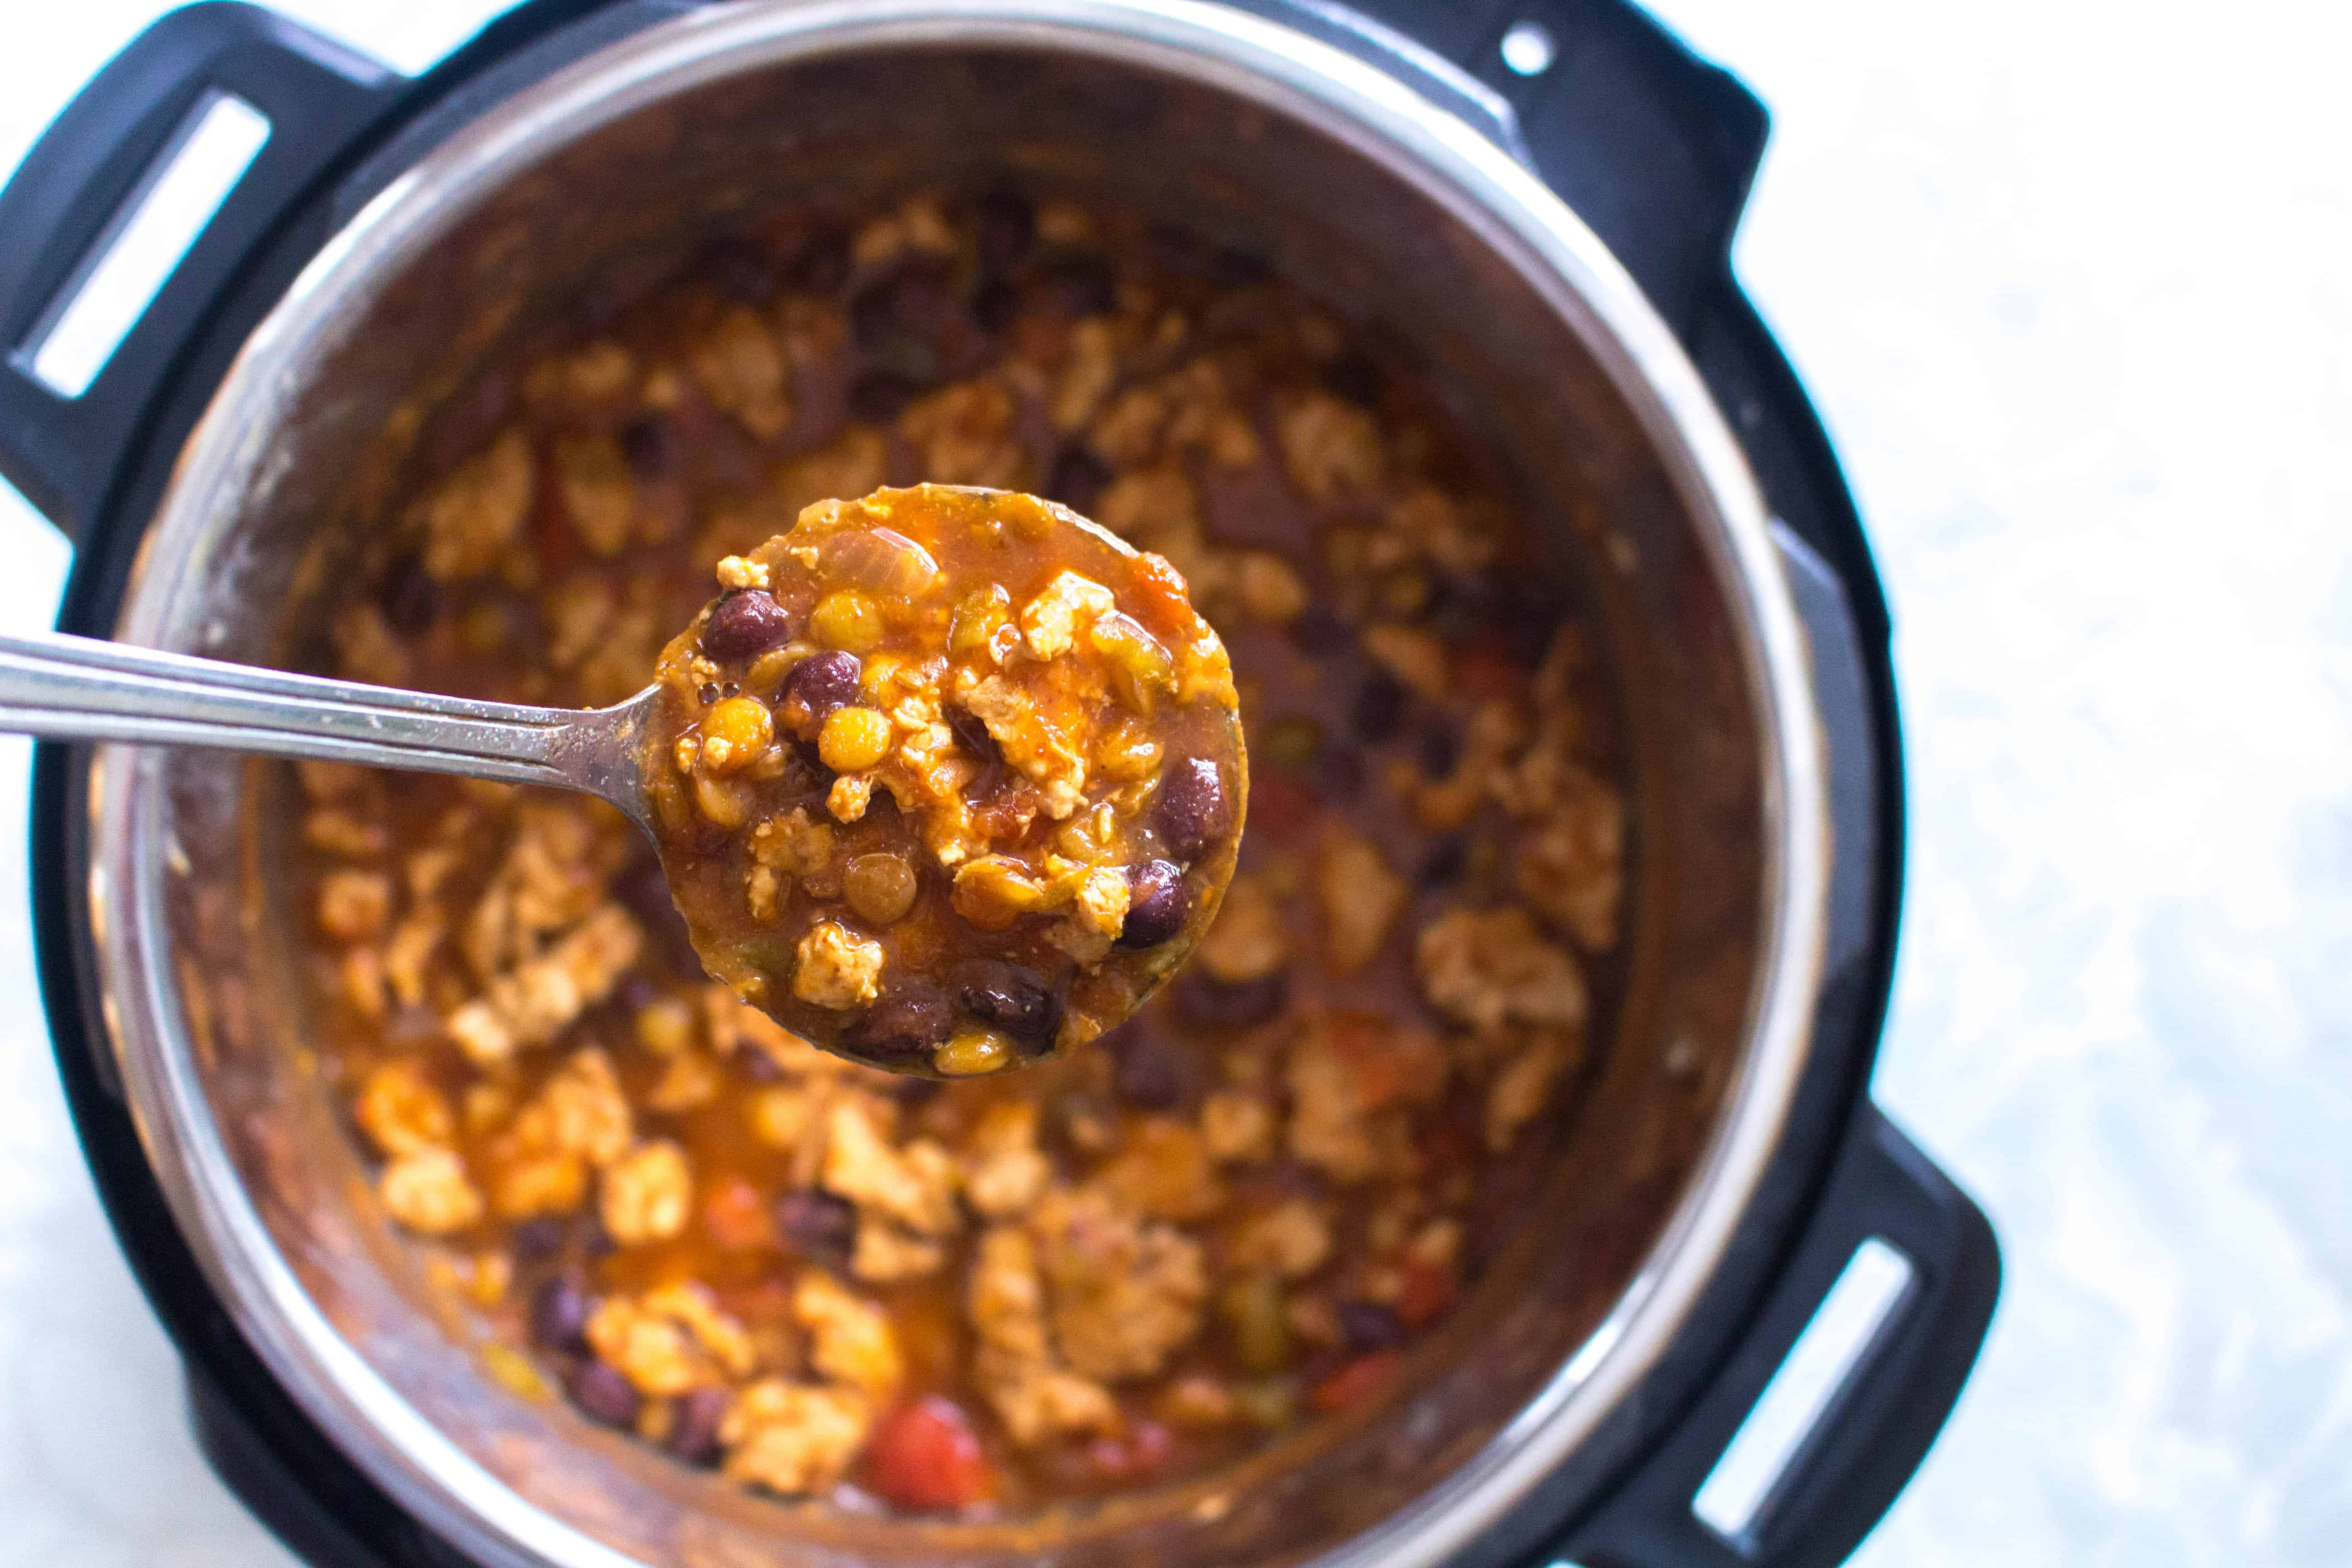 Healthy Instant Pot Turkey And Lentil Chili Video Stove Top Slow Cooker Instructions Carmy Run Eat Travel